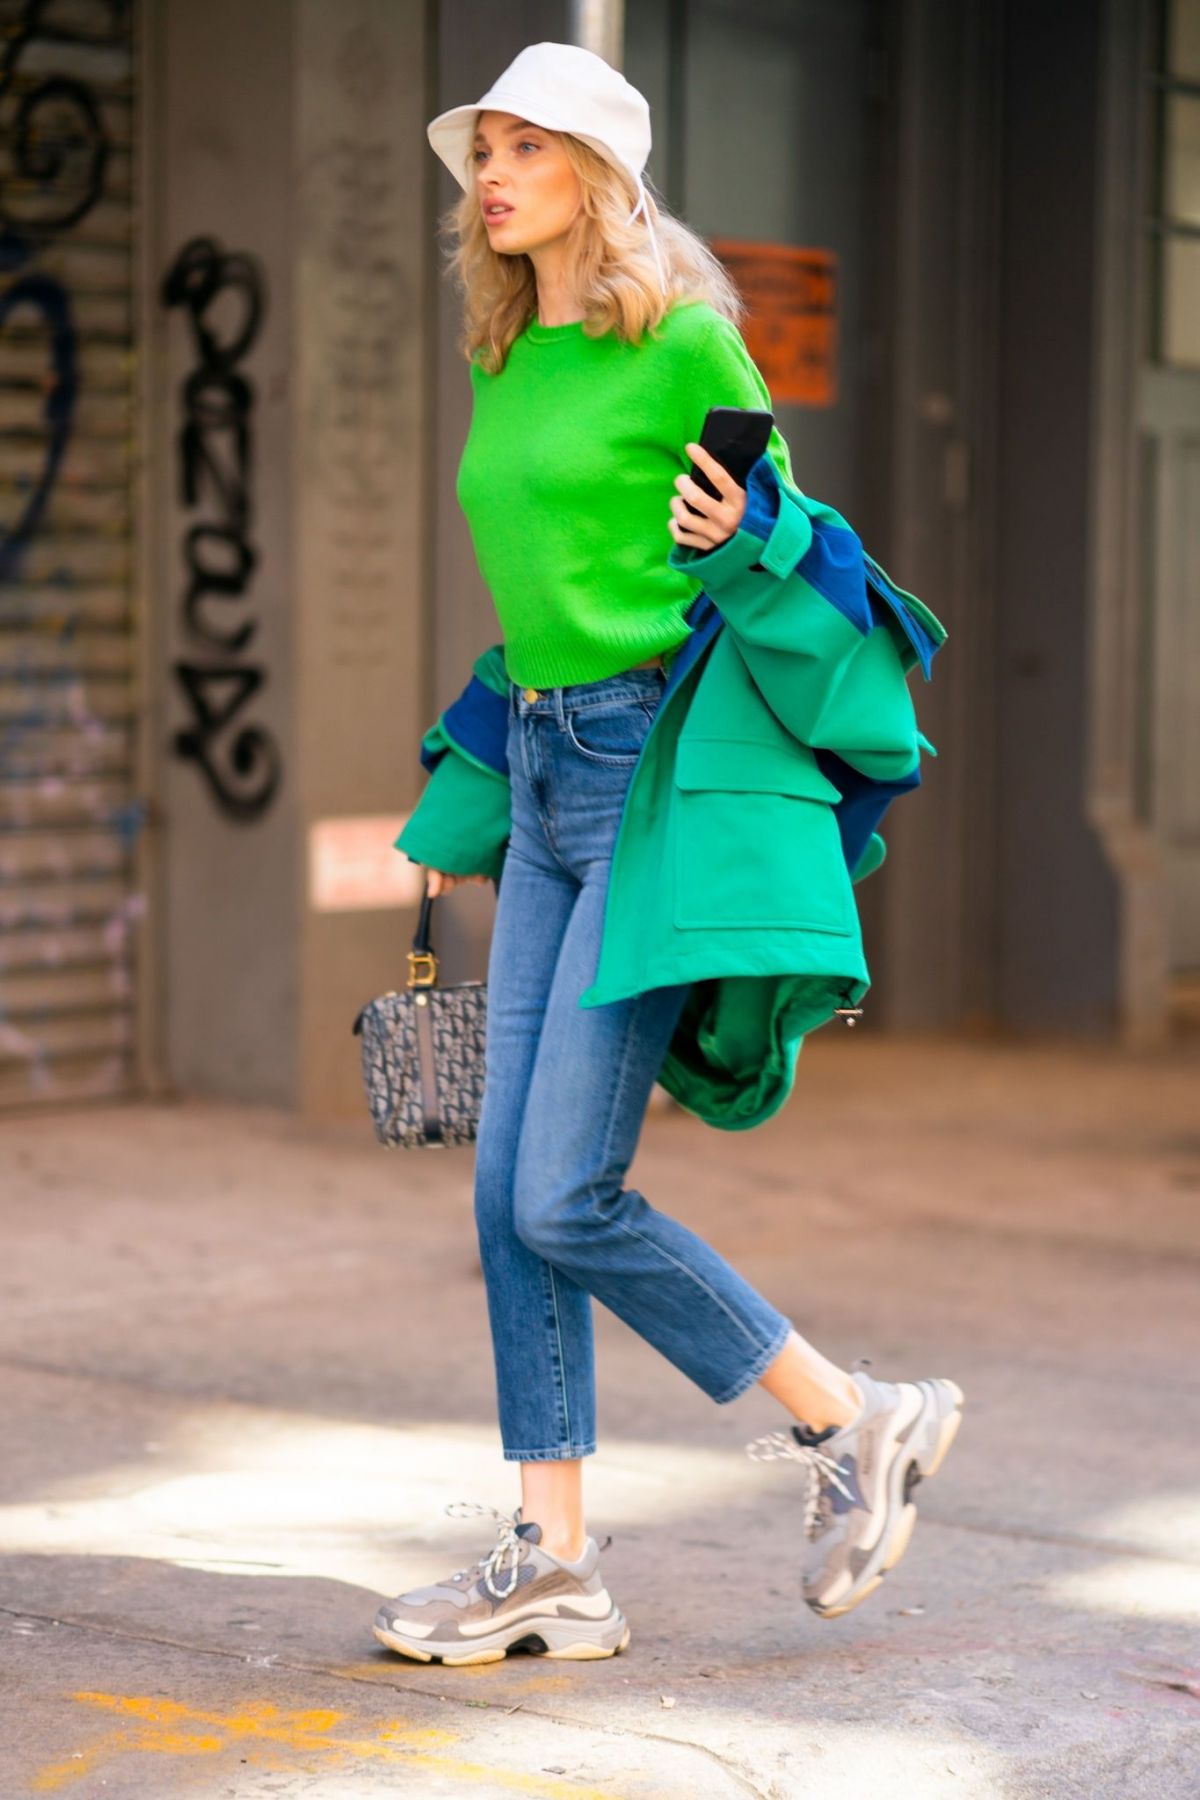 elsa-hosk-out-and-about-in-new-york-04-24-2019-7.jpg